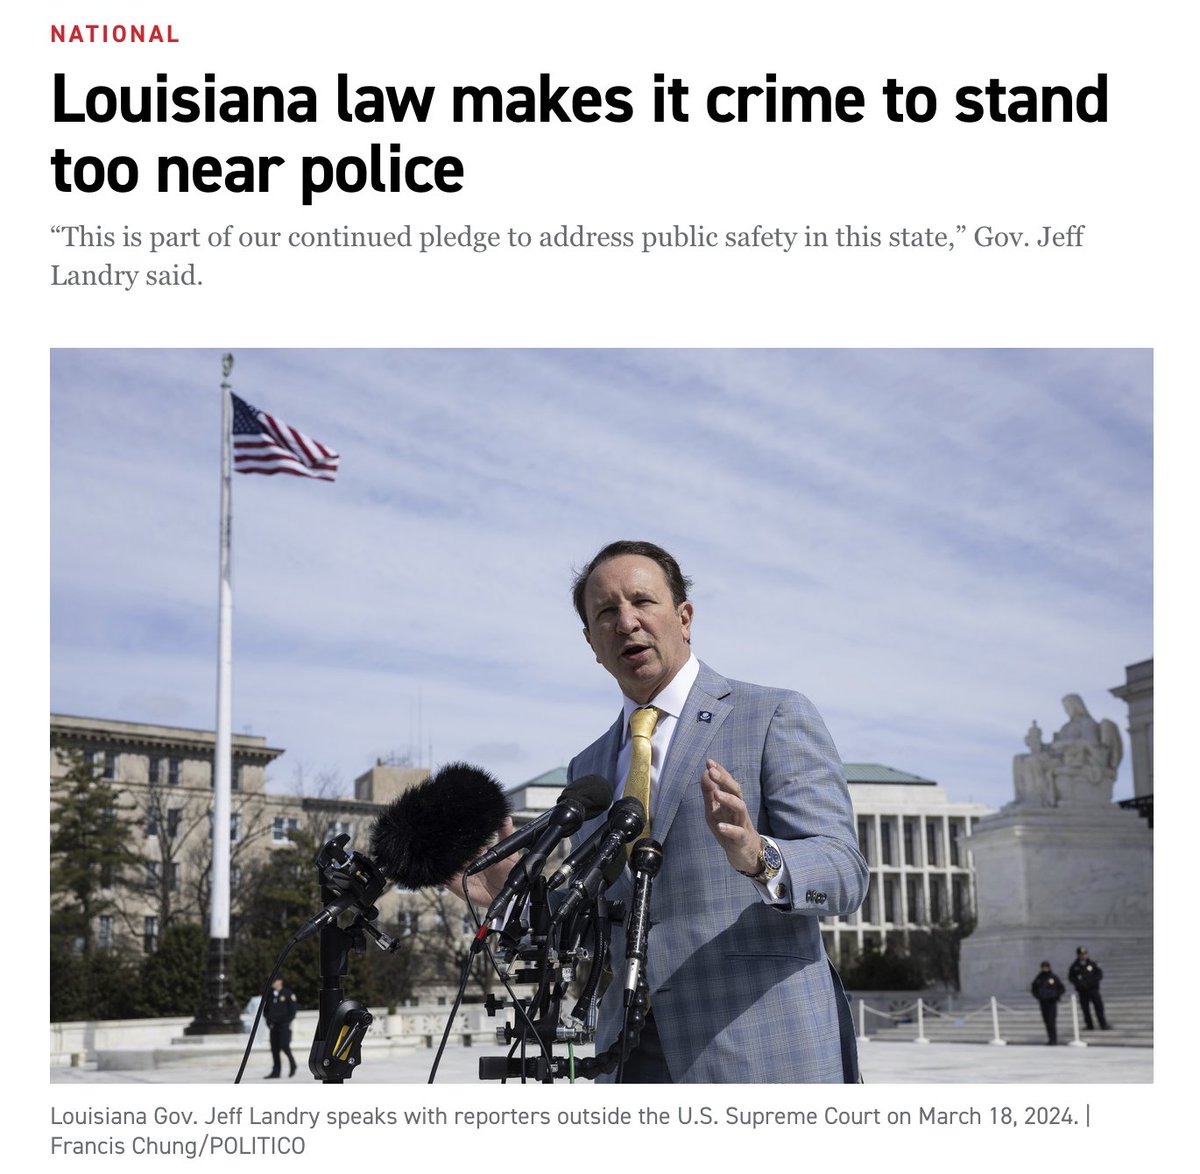 ‼️ Louisiana is moving to criminalize the public's ability to record the police and hold officers accountable for violence and misconduct. This is a ridiculous move that has nothing to do with 'addressing public safety' and everything to do with violating the basic rights of the